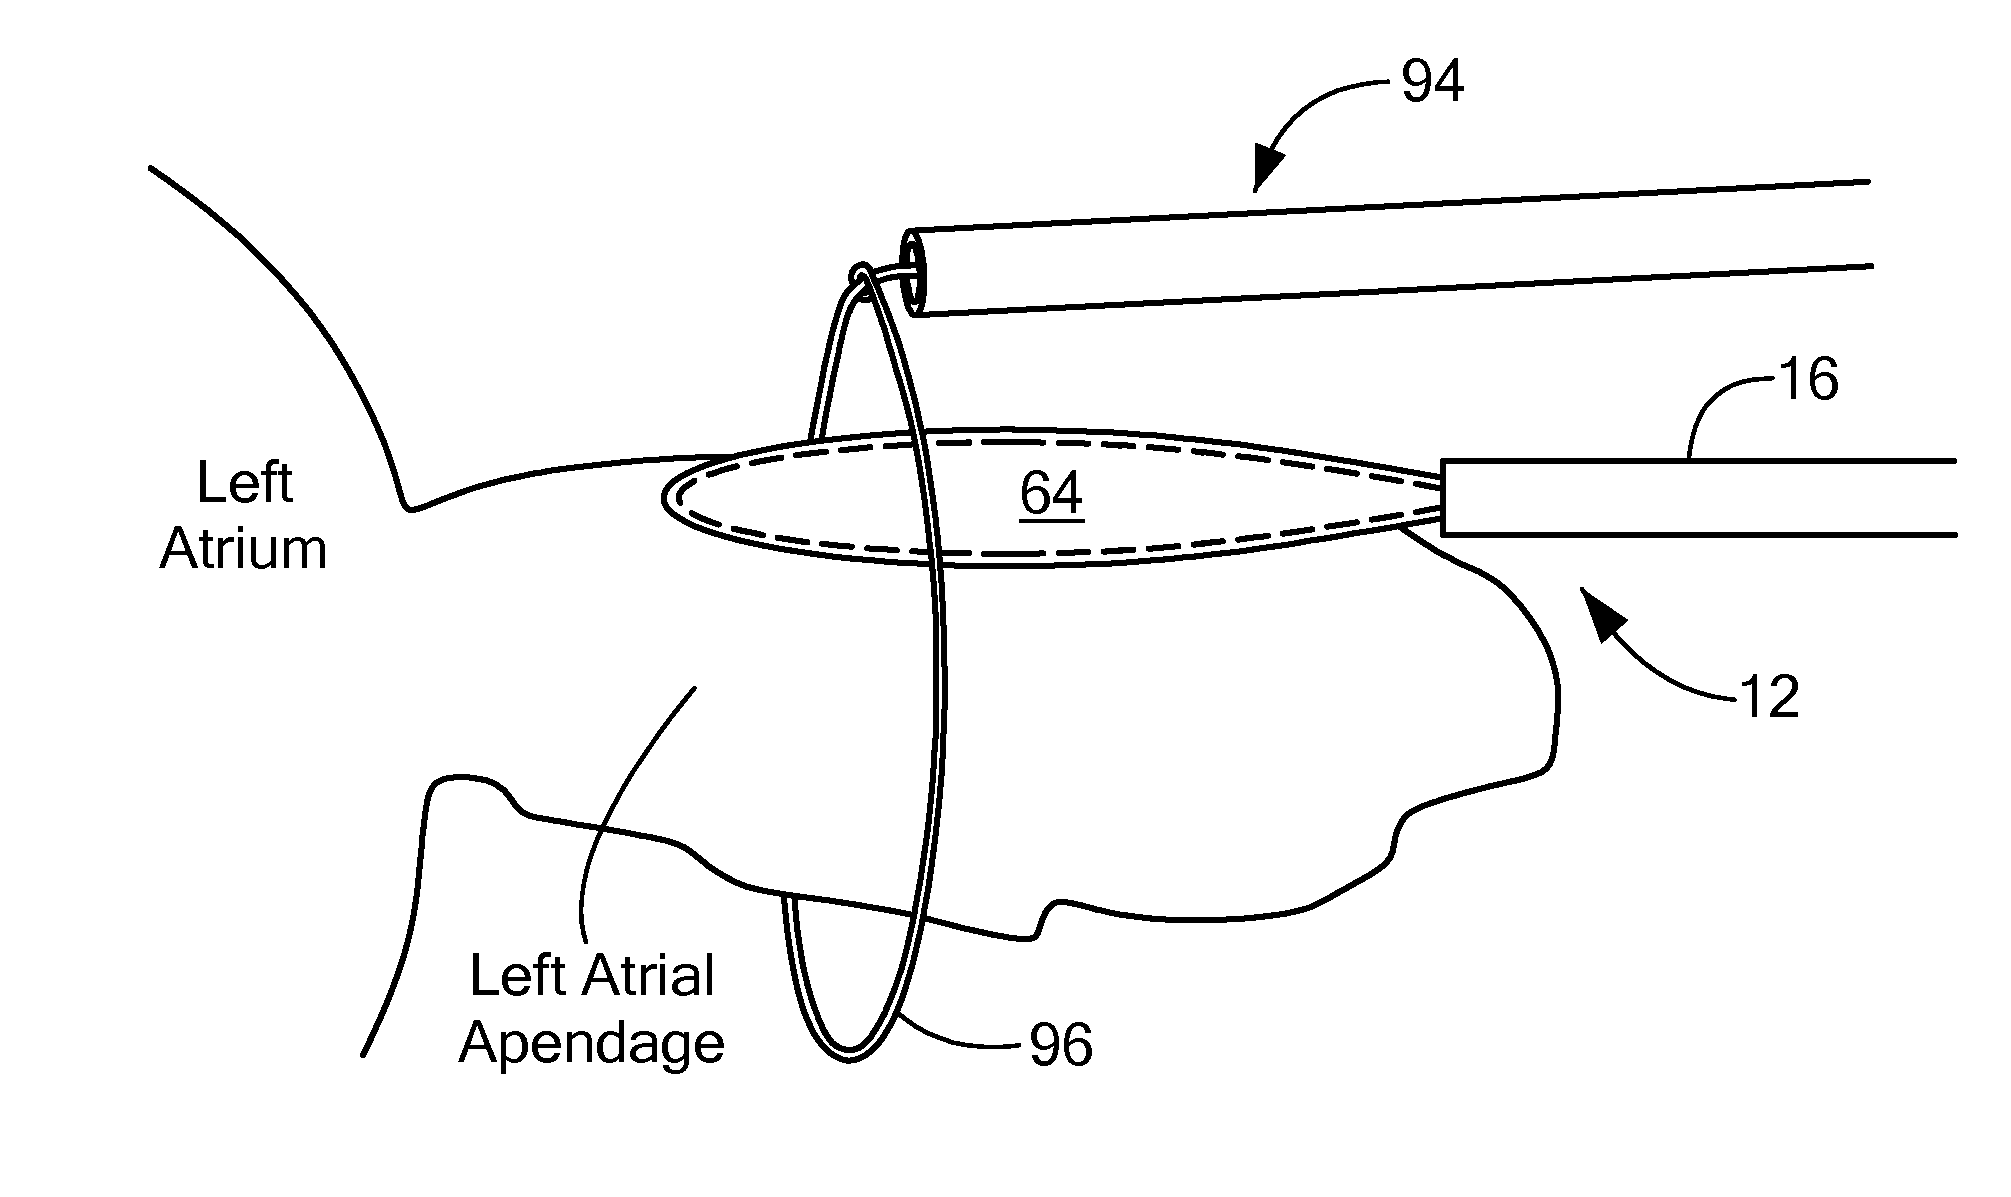 Cryoadhesive device for left atrial appendage occlusion